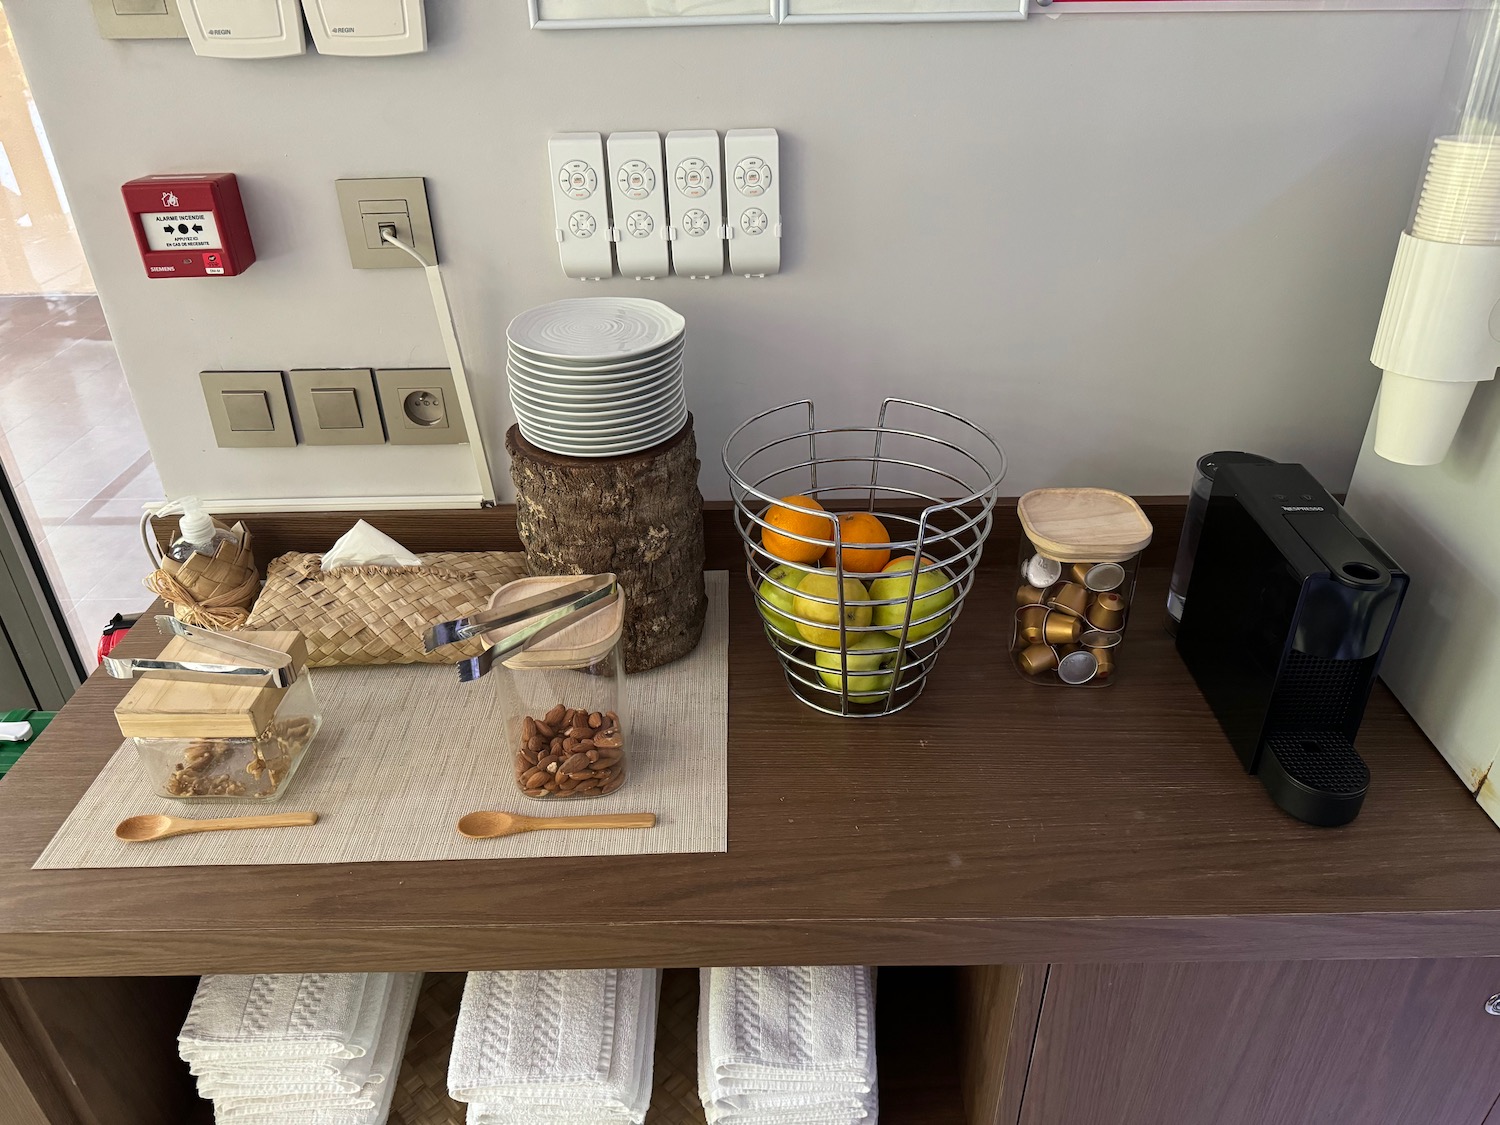 a table with food and coffee machine